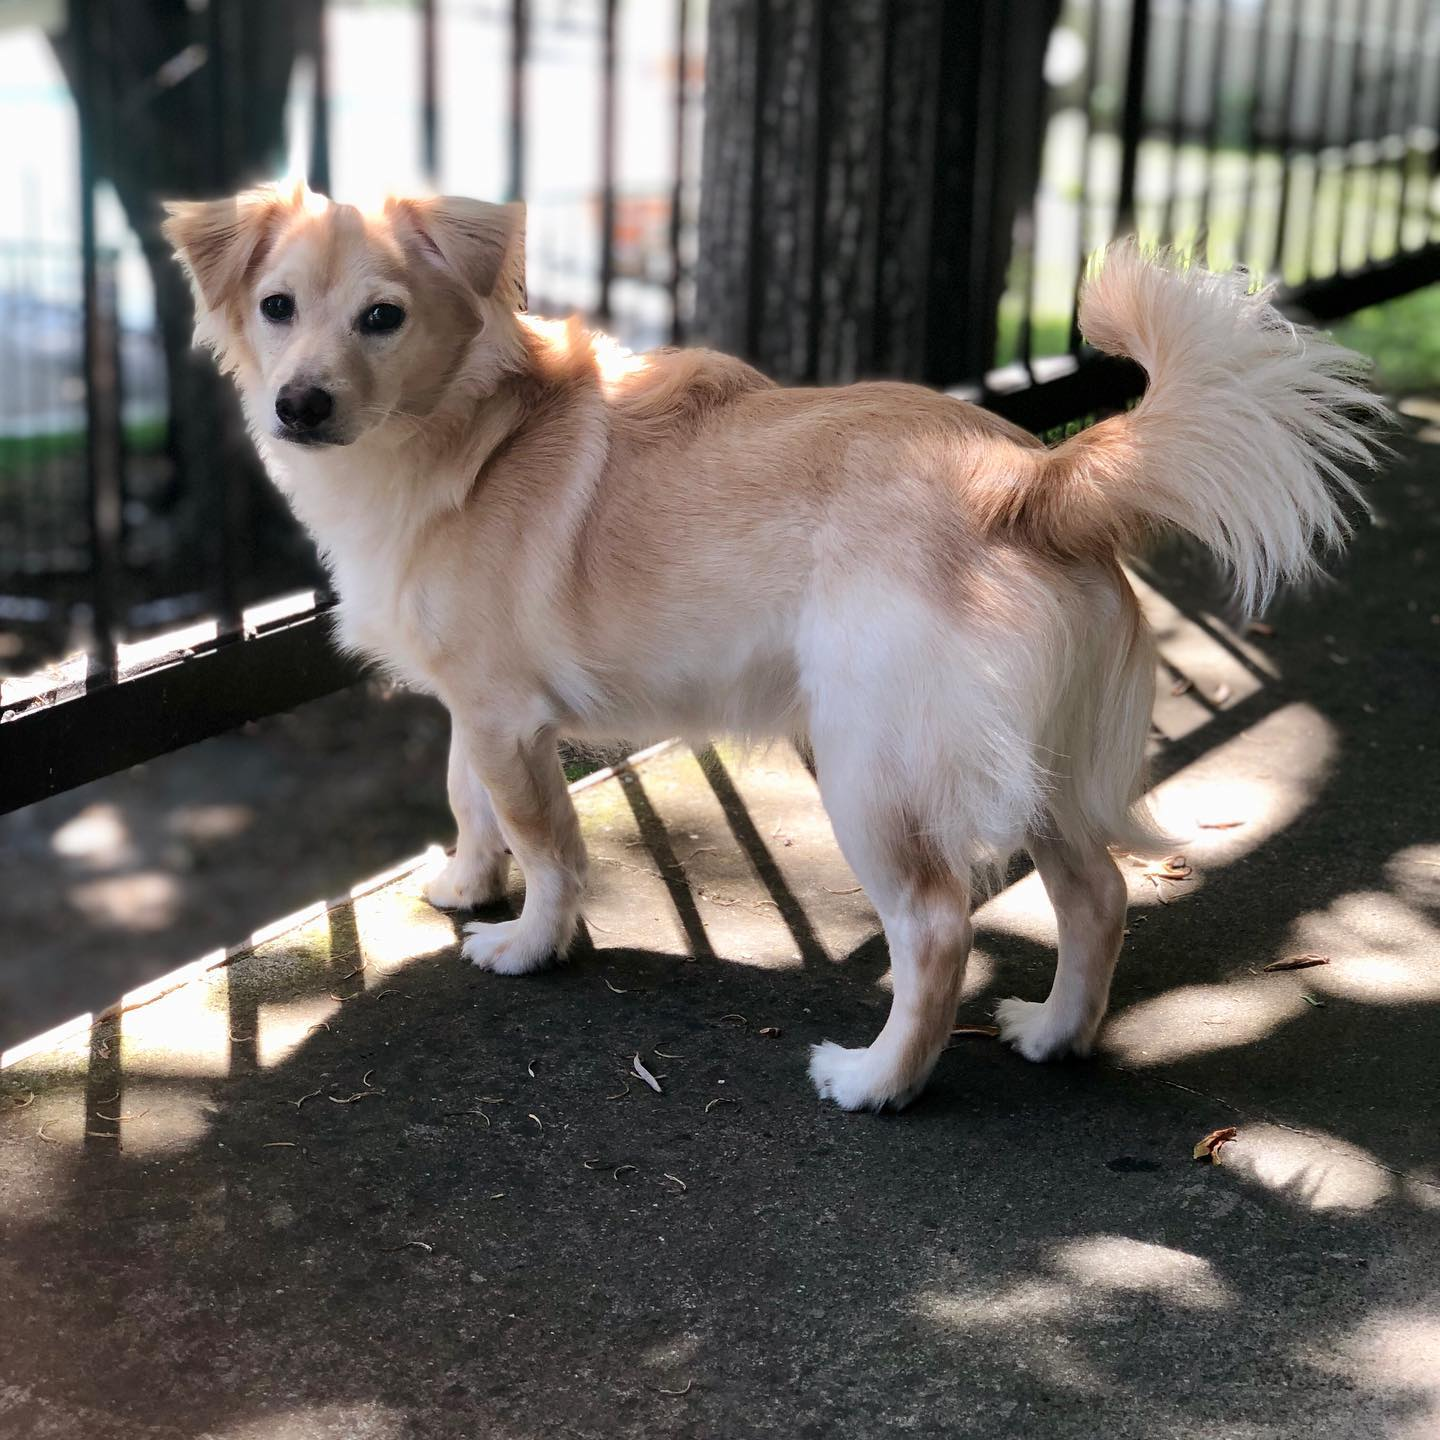 Logan is a golden retriever mix with chihuahua